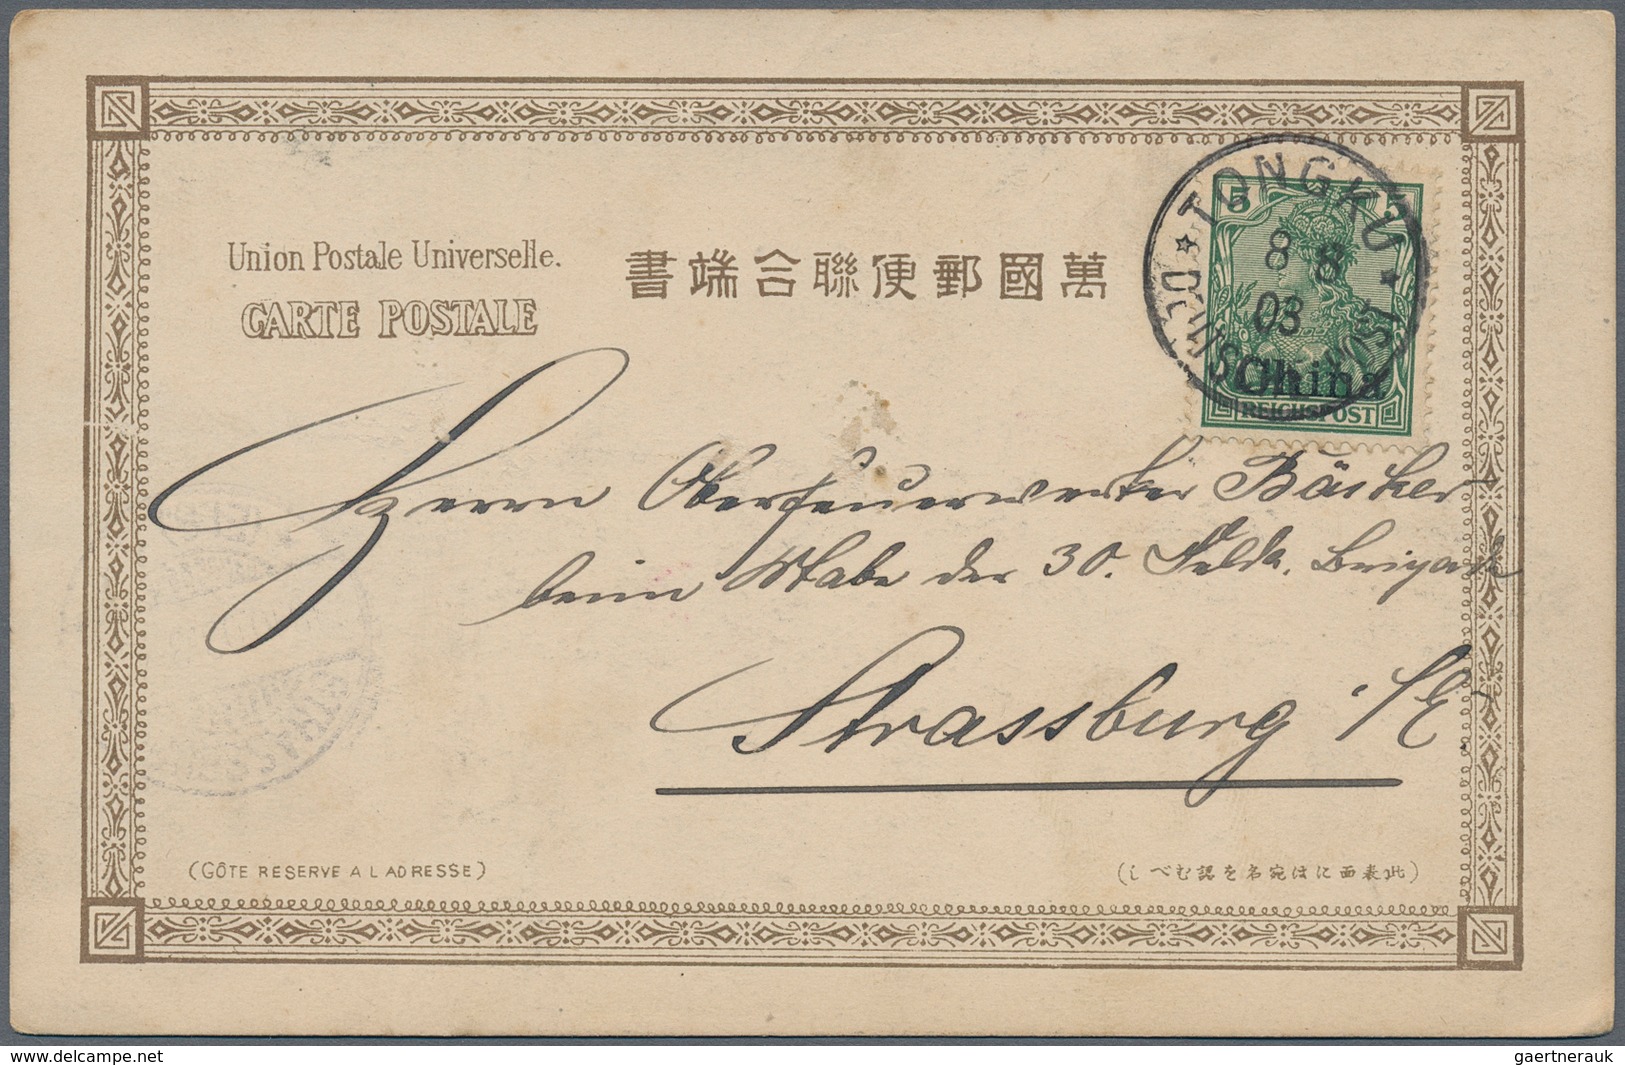 China - Fremde Postanstalten / Foreign Offices: Germany, 1894/1914, covers (3), used ppc (10), inc.